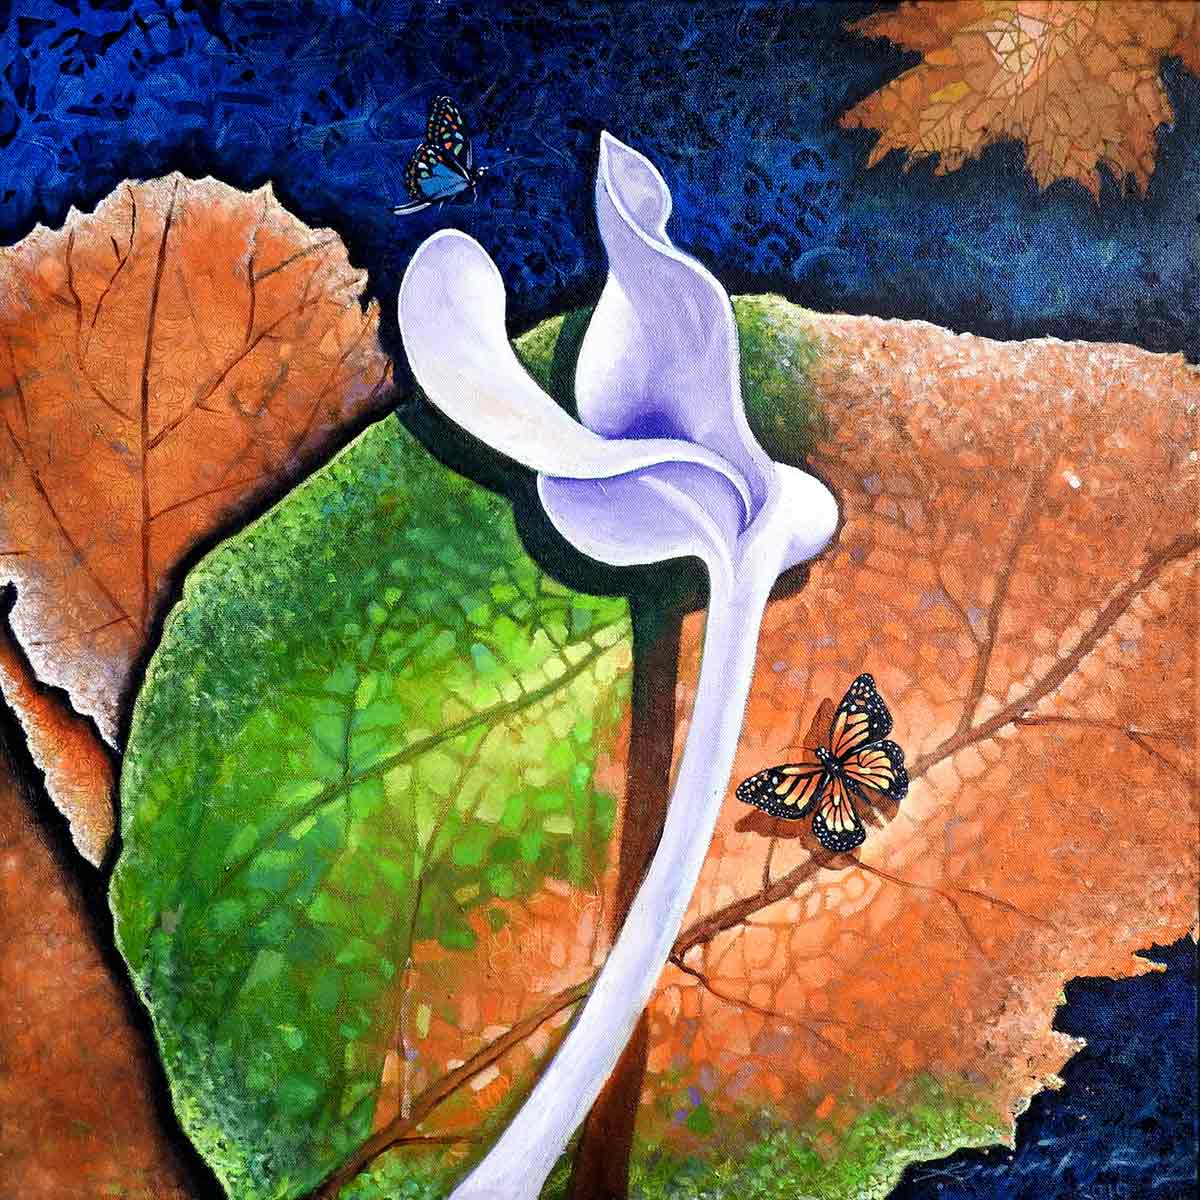 Conceptual Painting with Oil on Canvas "Essence of Leaves-3" art by Gautam Partho Roy